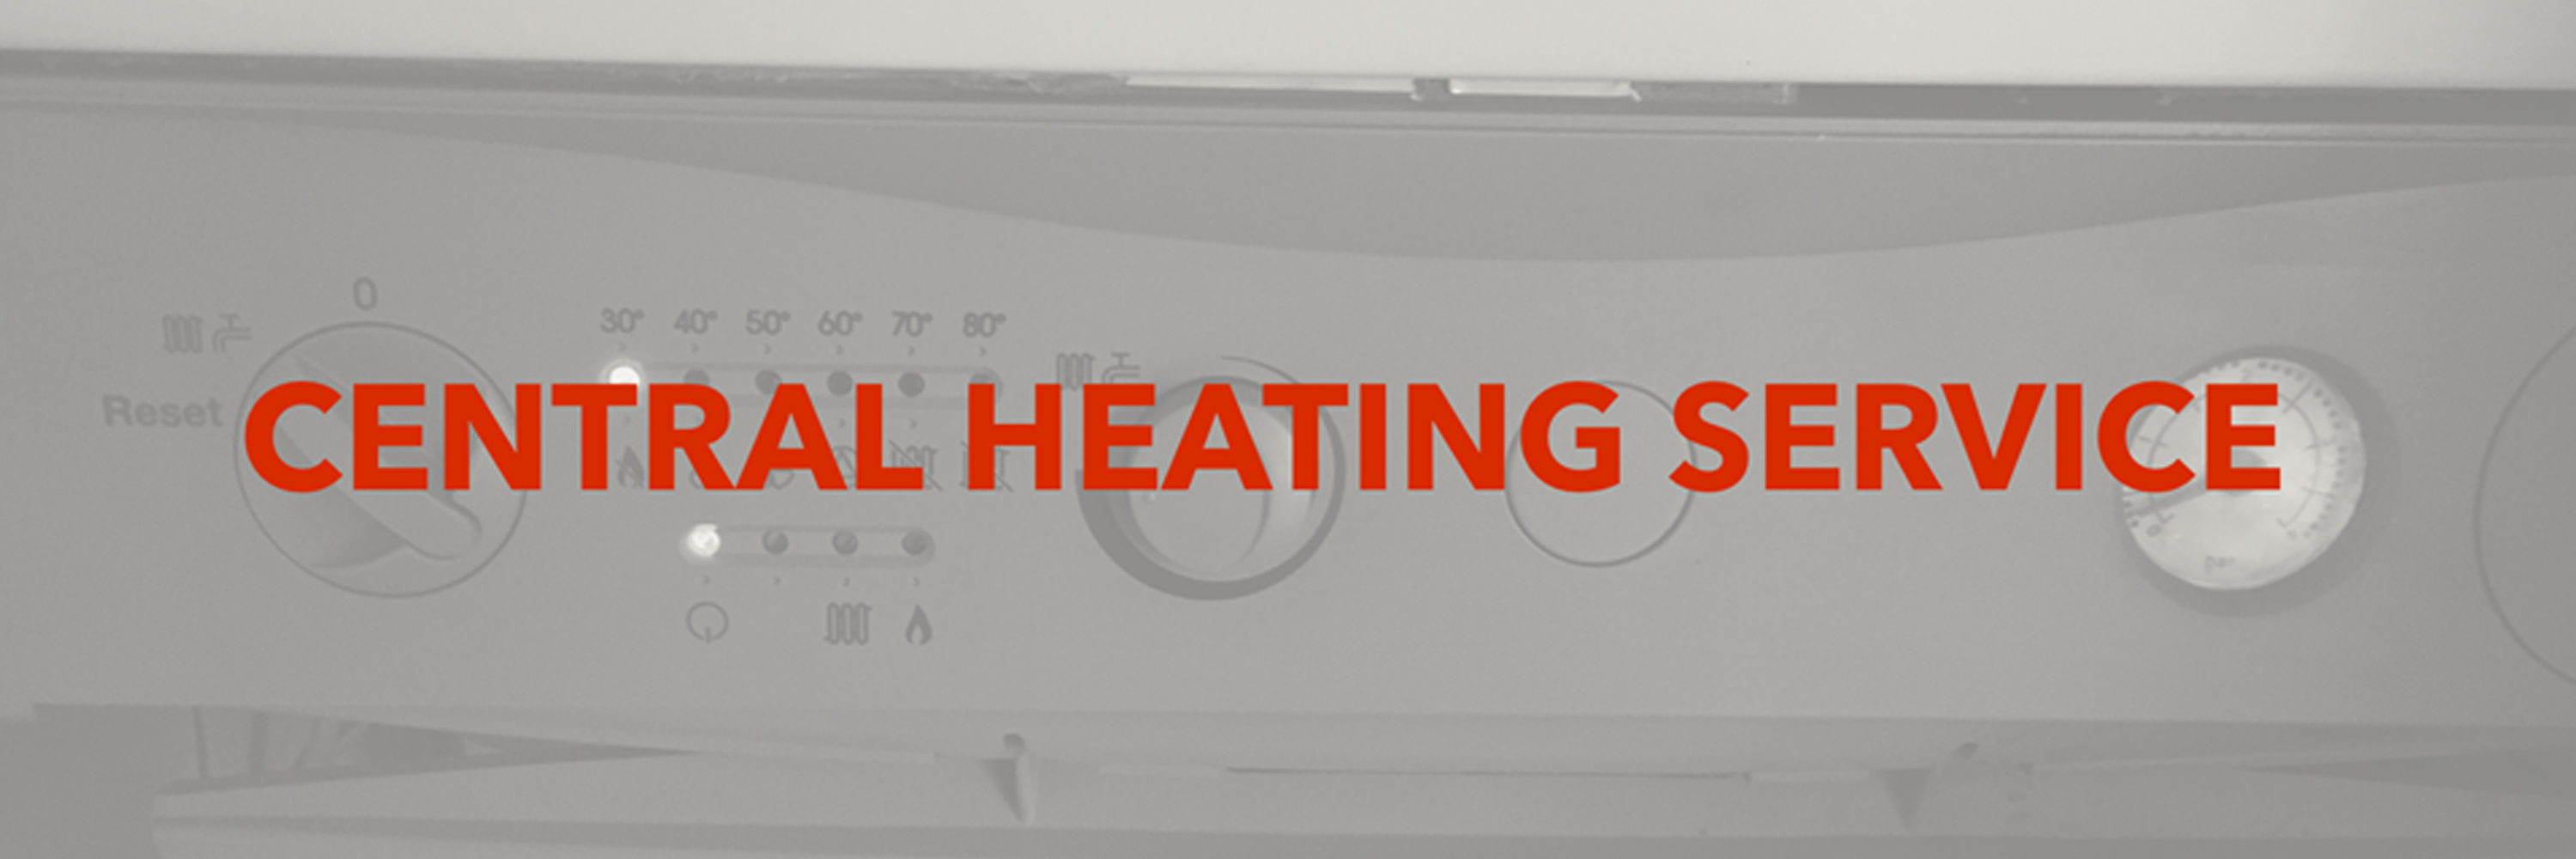 Central Heating Service